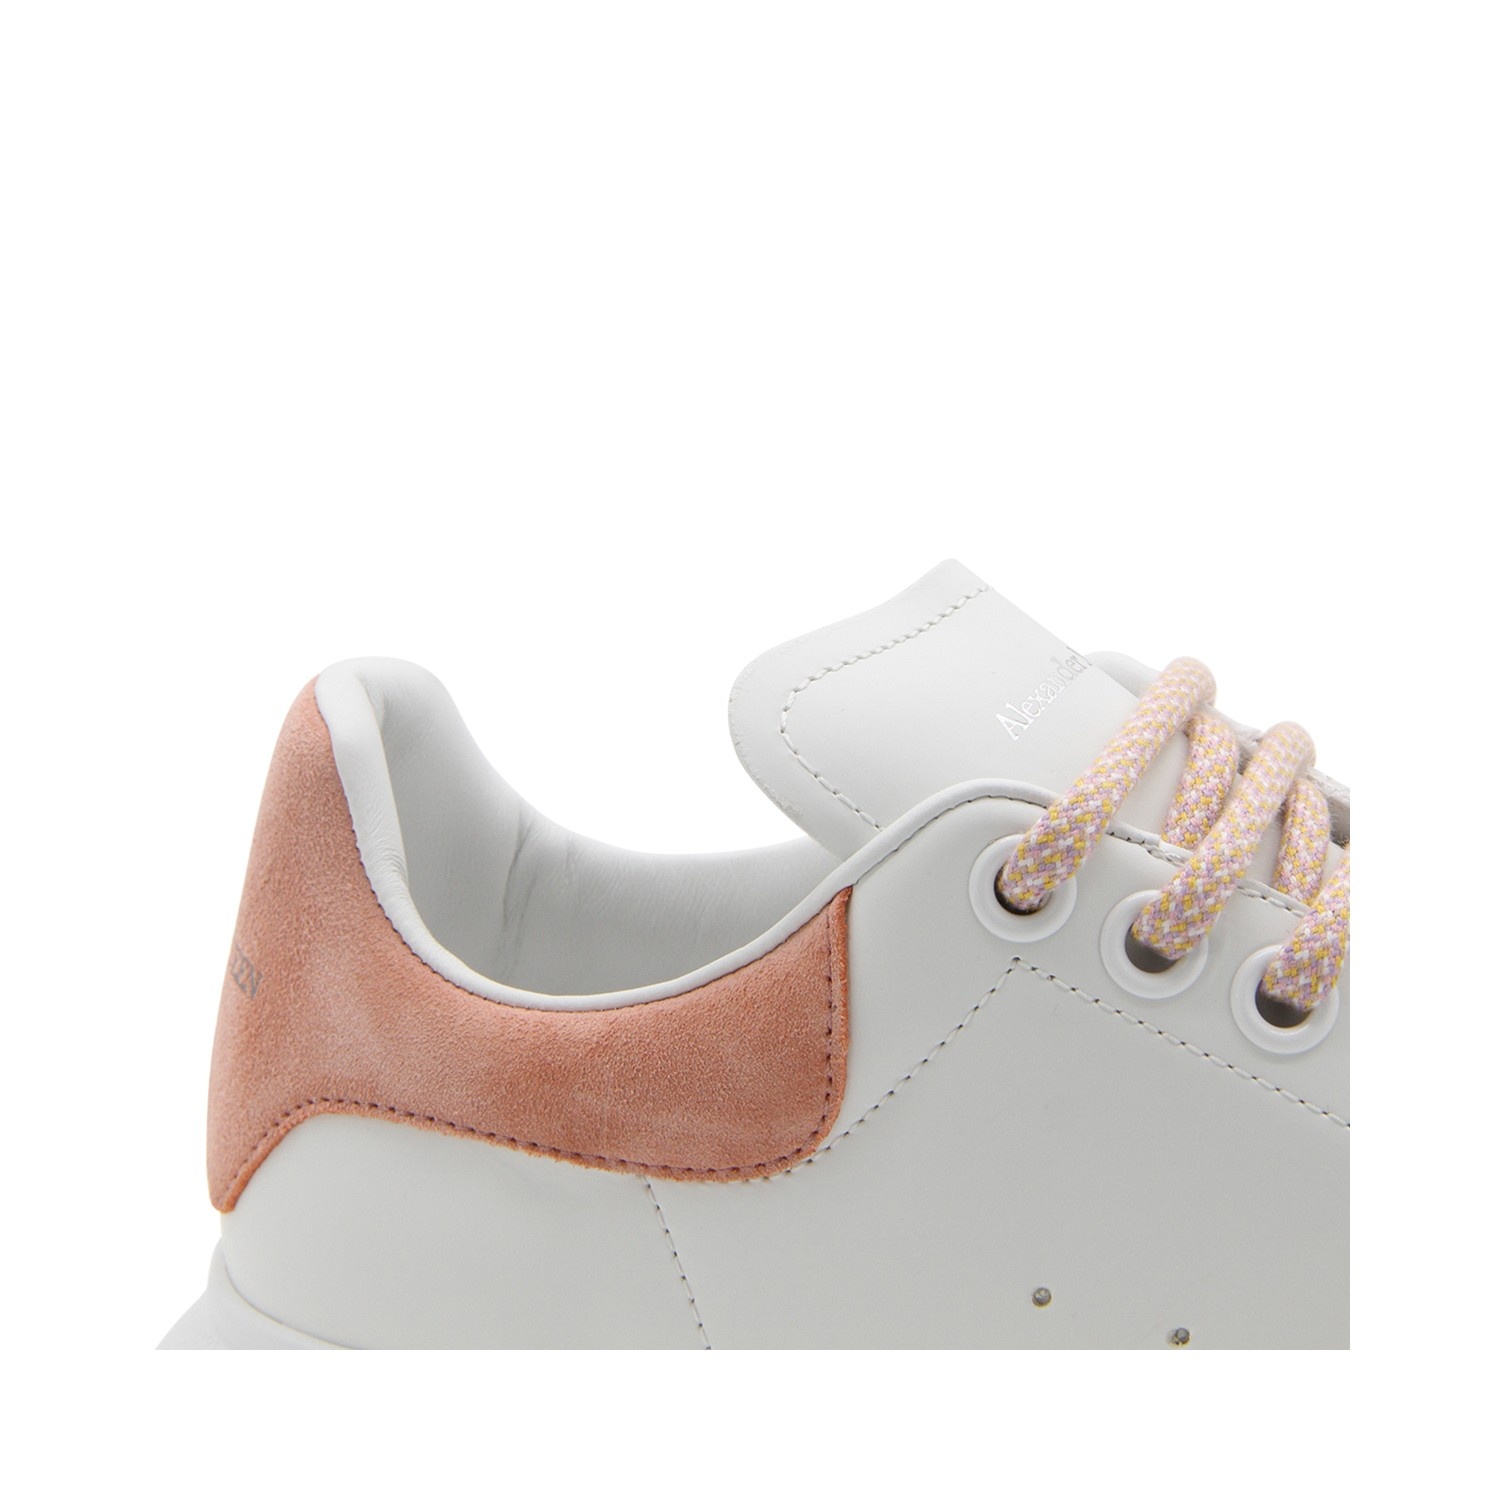 WHITE LEATHER AND PINK SUEDE OVERSIZED SNEAKERS - 7